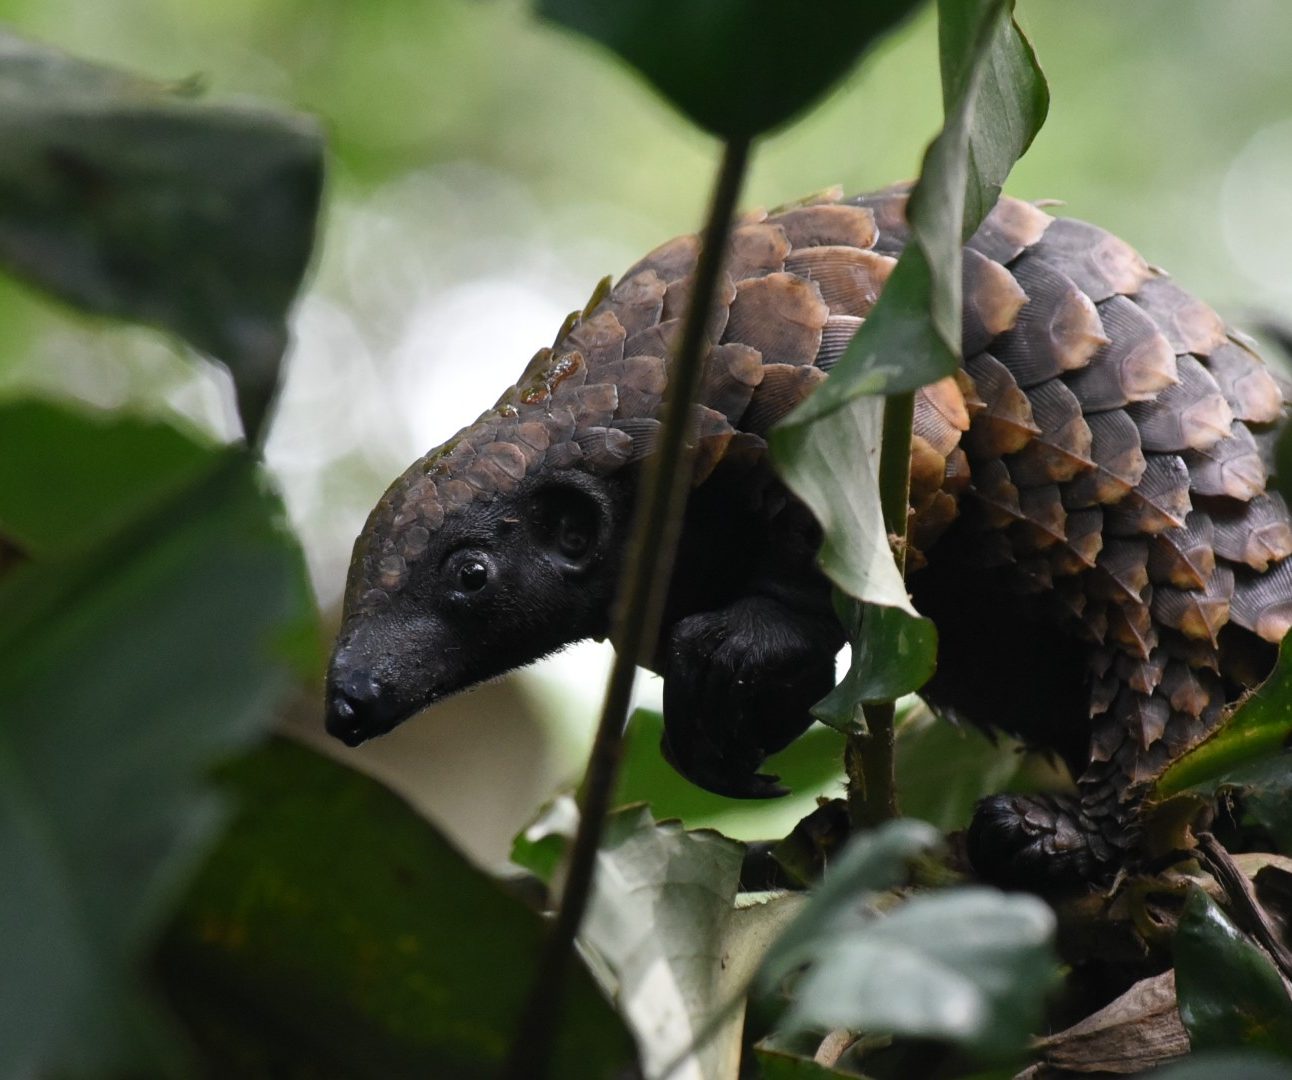 A close-up image of a pangolin in a tree